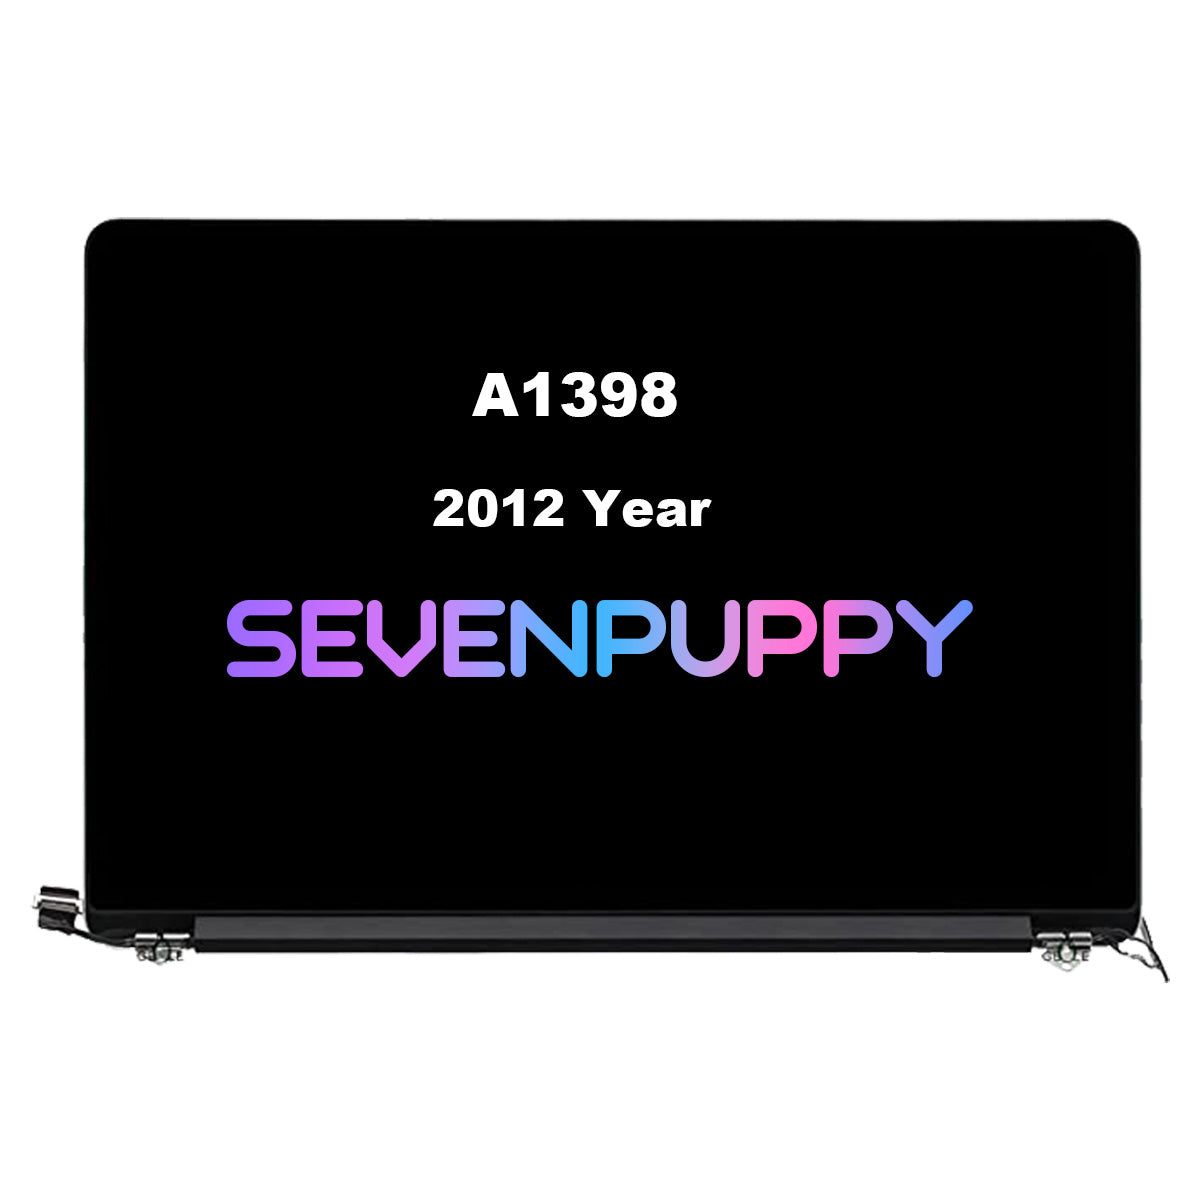 SEVEN PUPPY Brand NEW For MacBook Pro 15“ A1398 2012 Year Retina Full LCD Display Screen Assembly Replacement